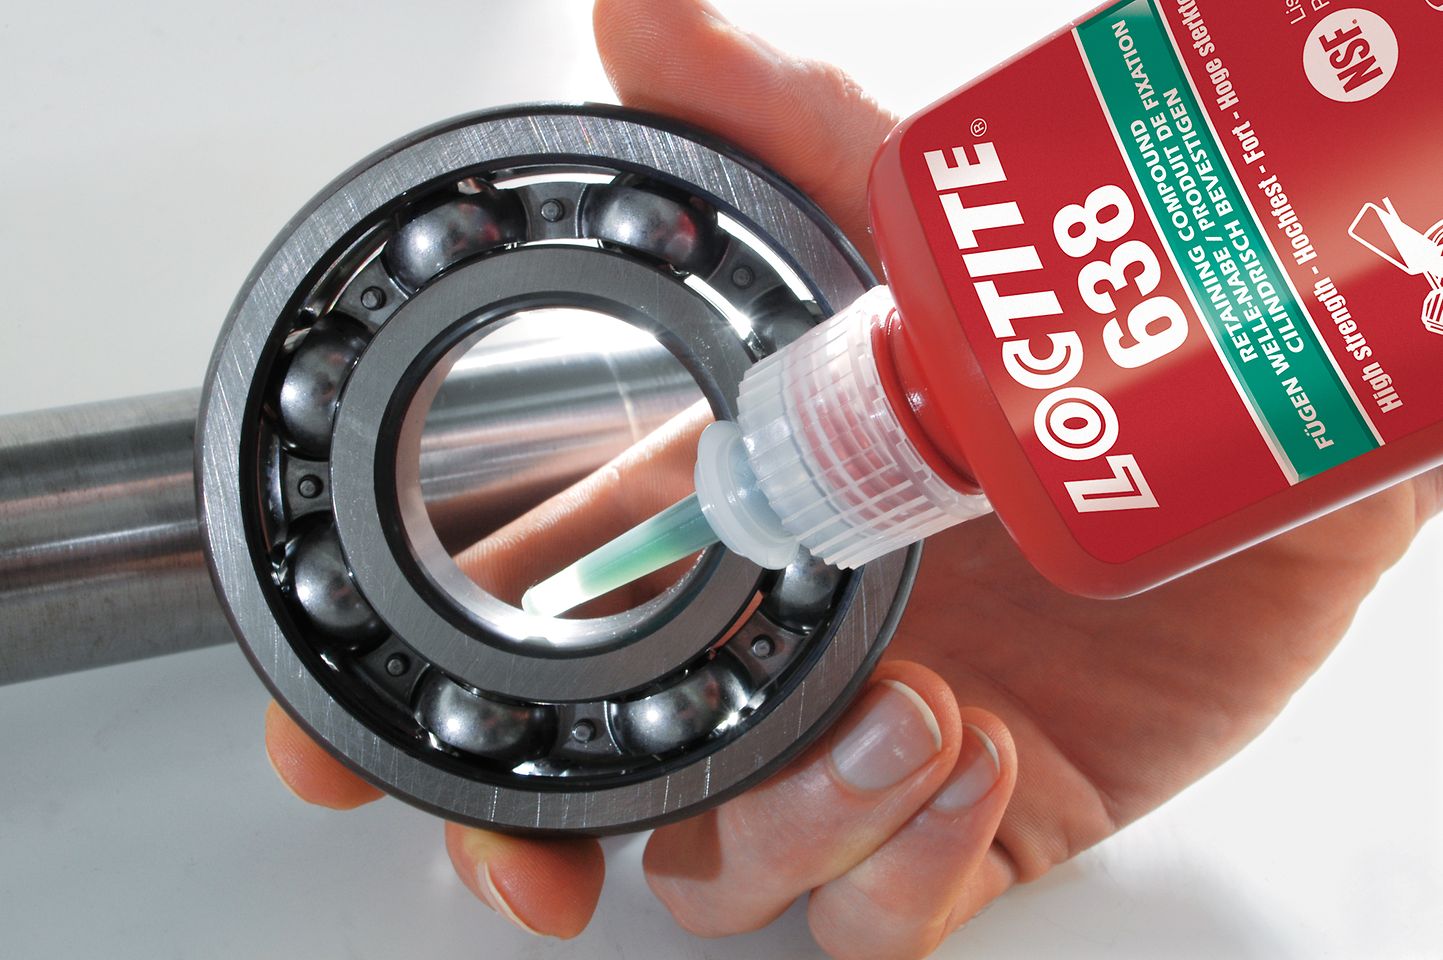 

Loctite 648: Anaerobic retaining adhesive with high temperature resistance and oil tolerance